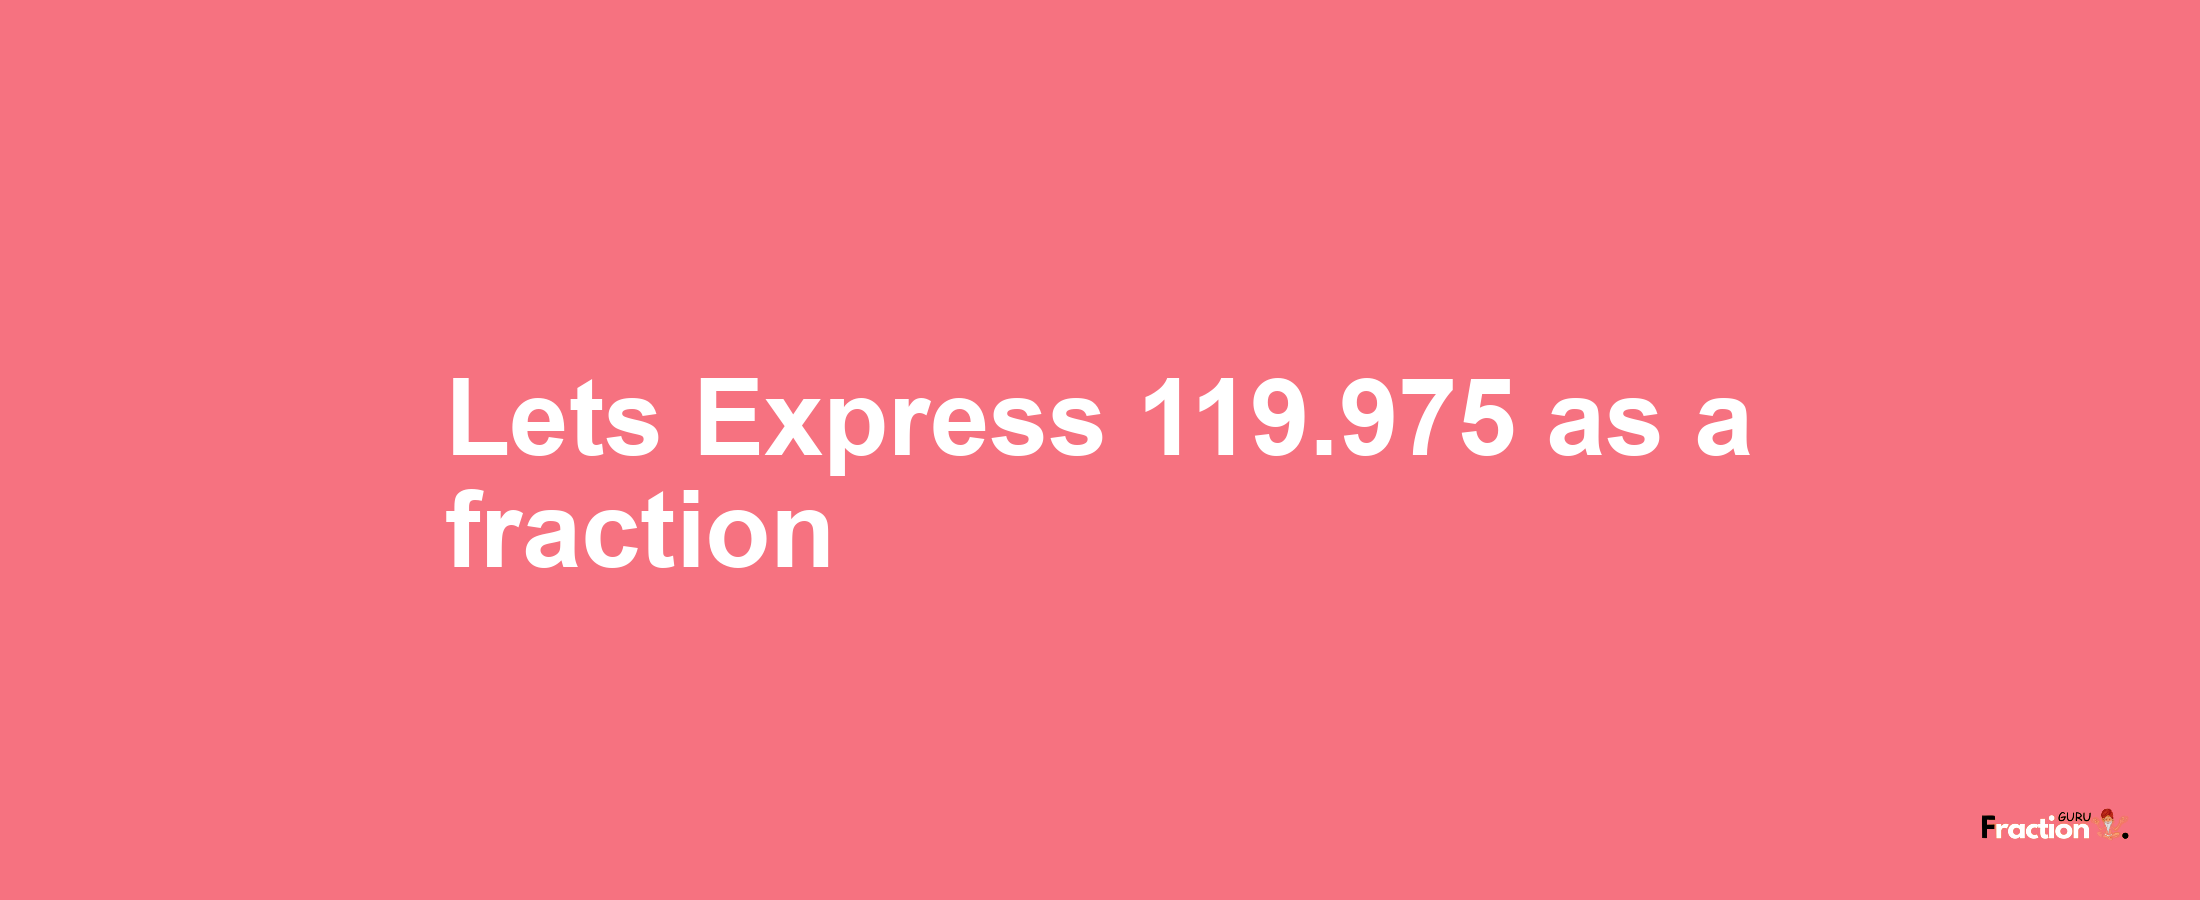 Lets Express 119.975 as afraction